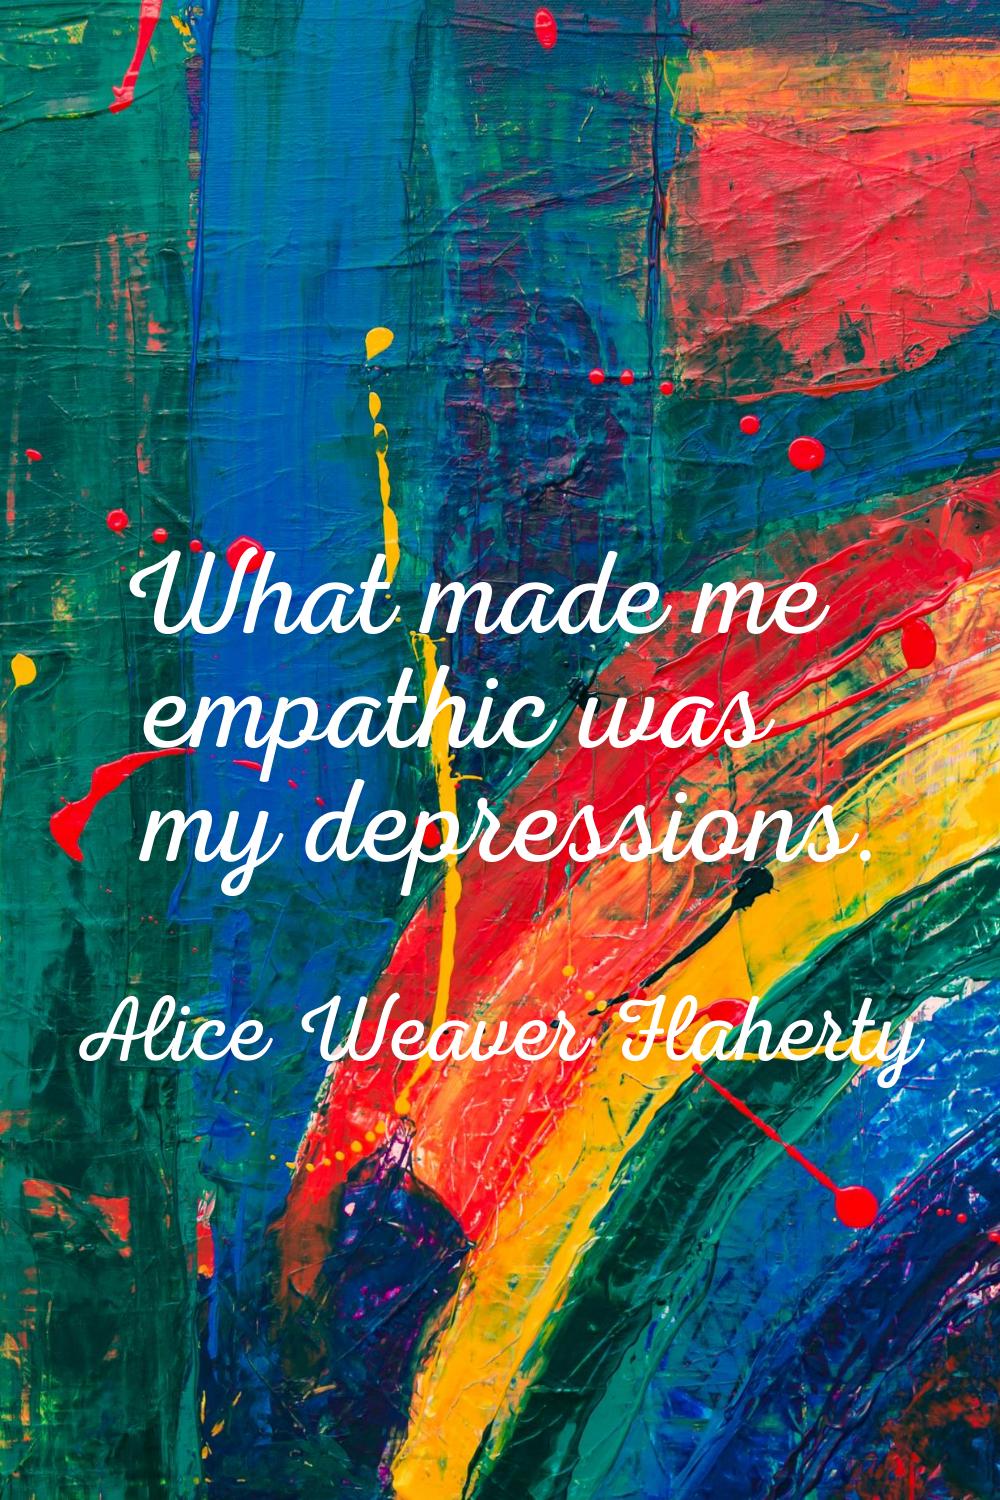 What made me empathic was my depressions.